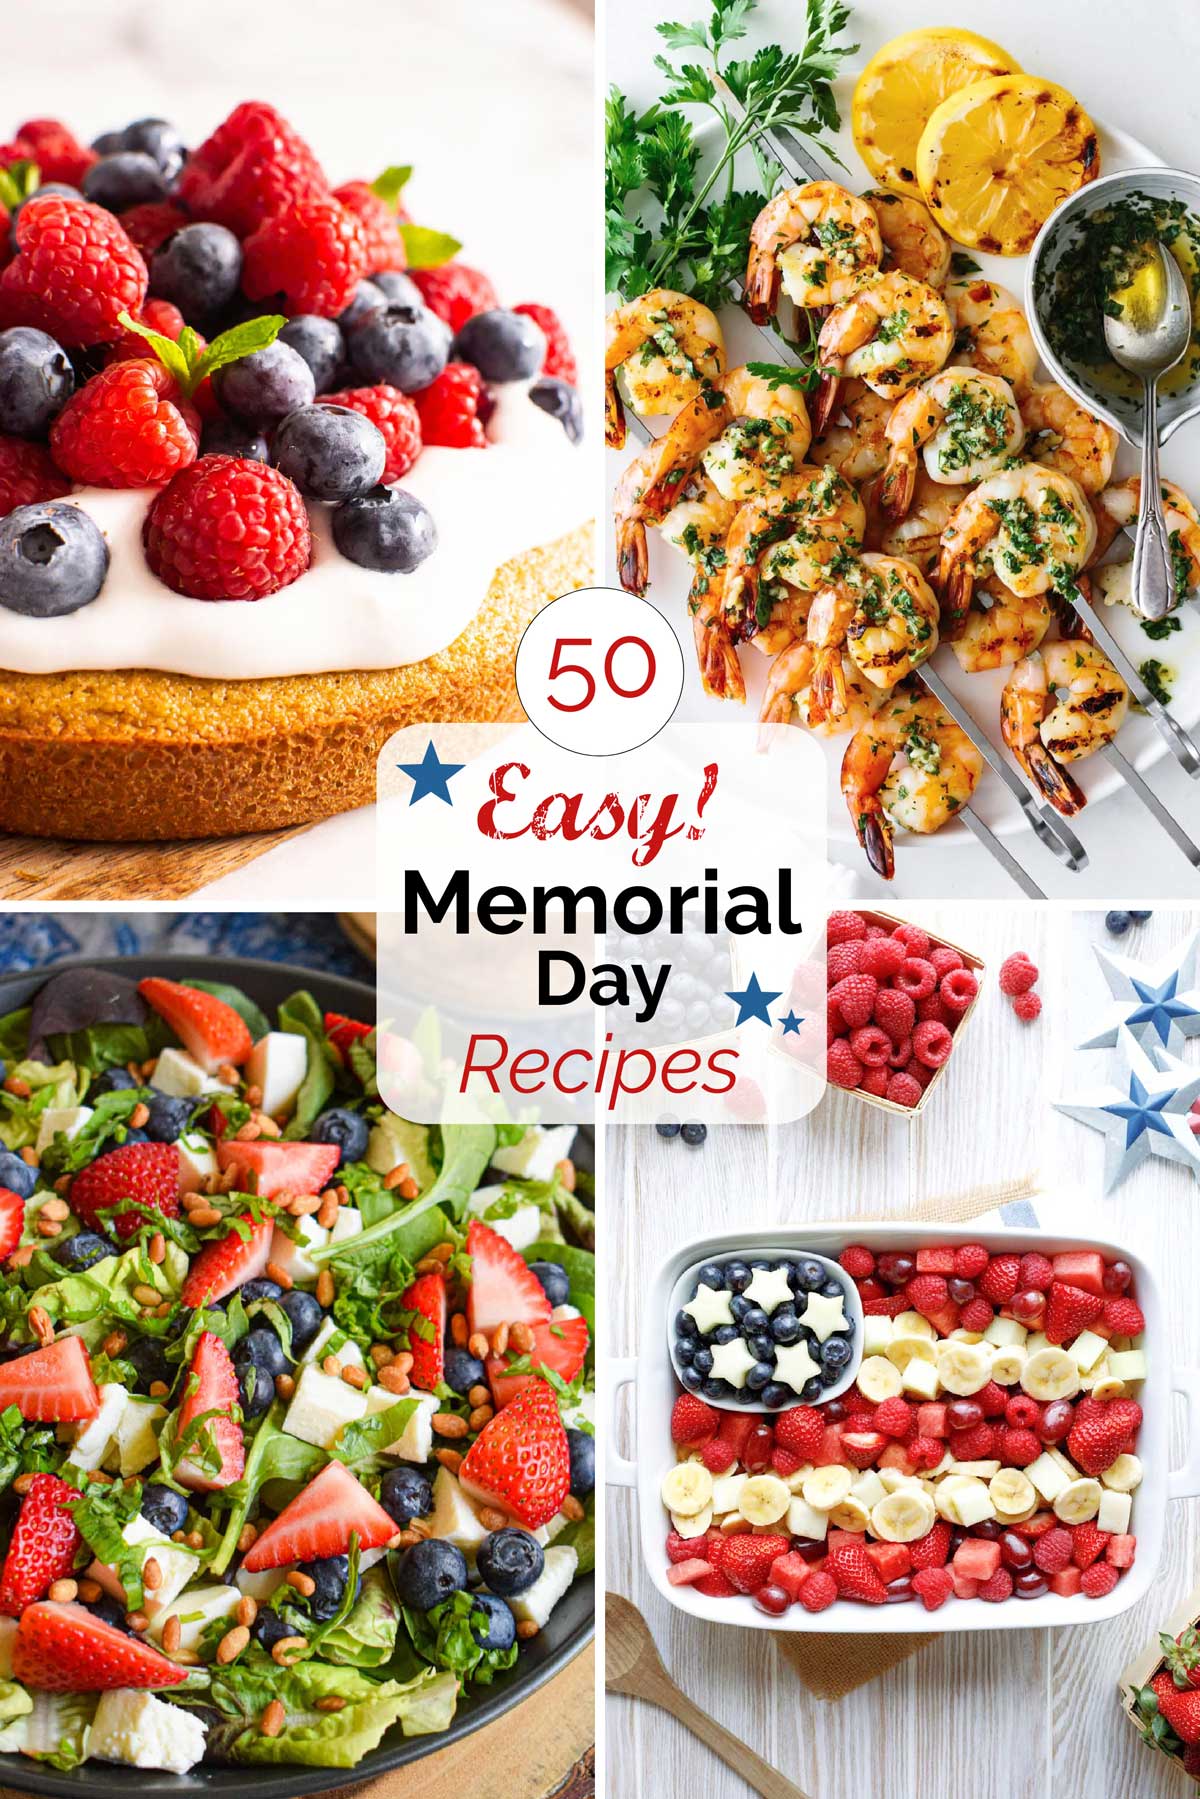 Collage with four recipe pictures with centered text box saying "50 Easy! Memorial Day Recipes".